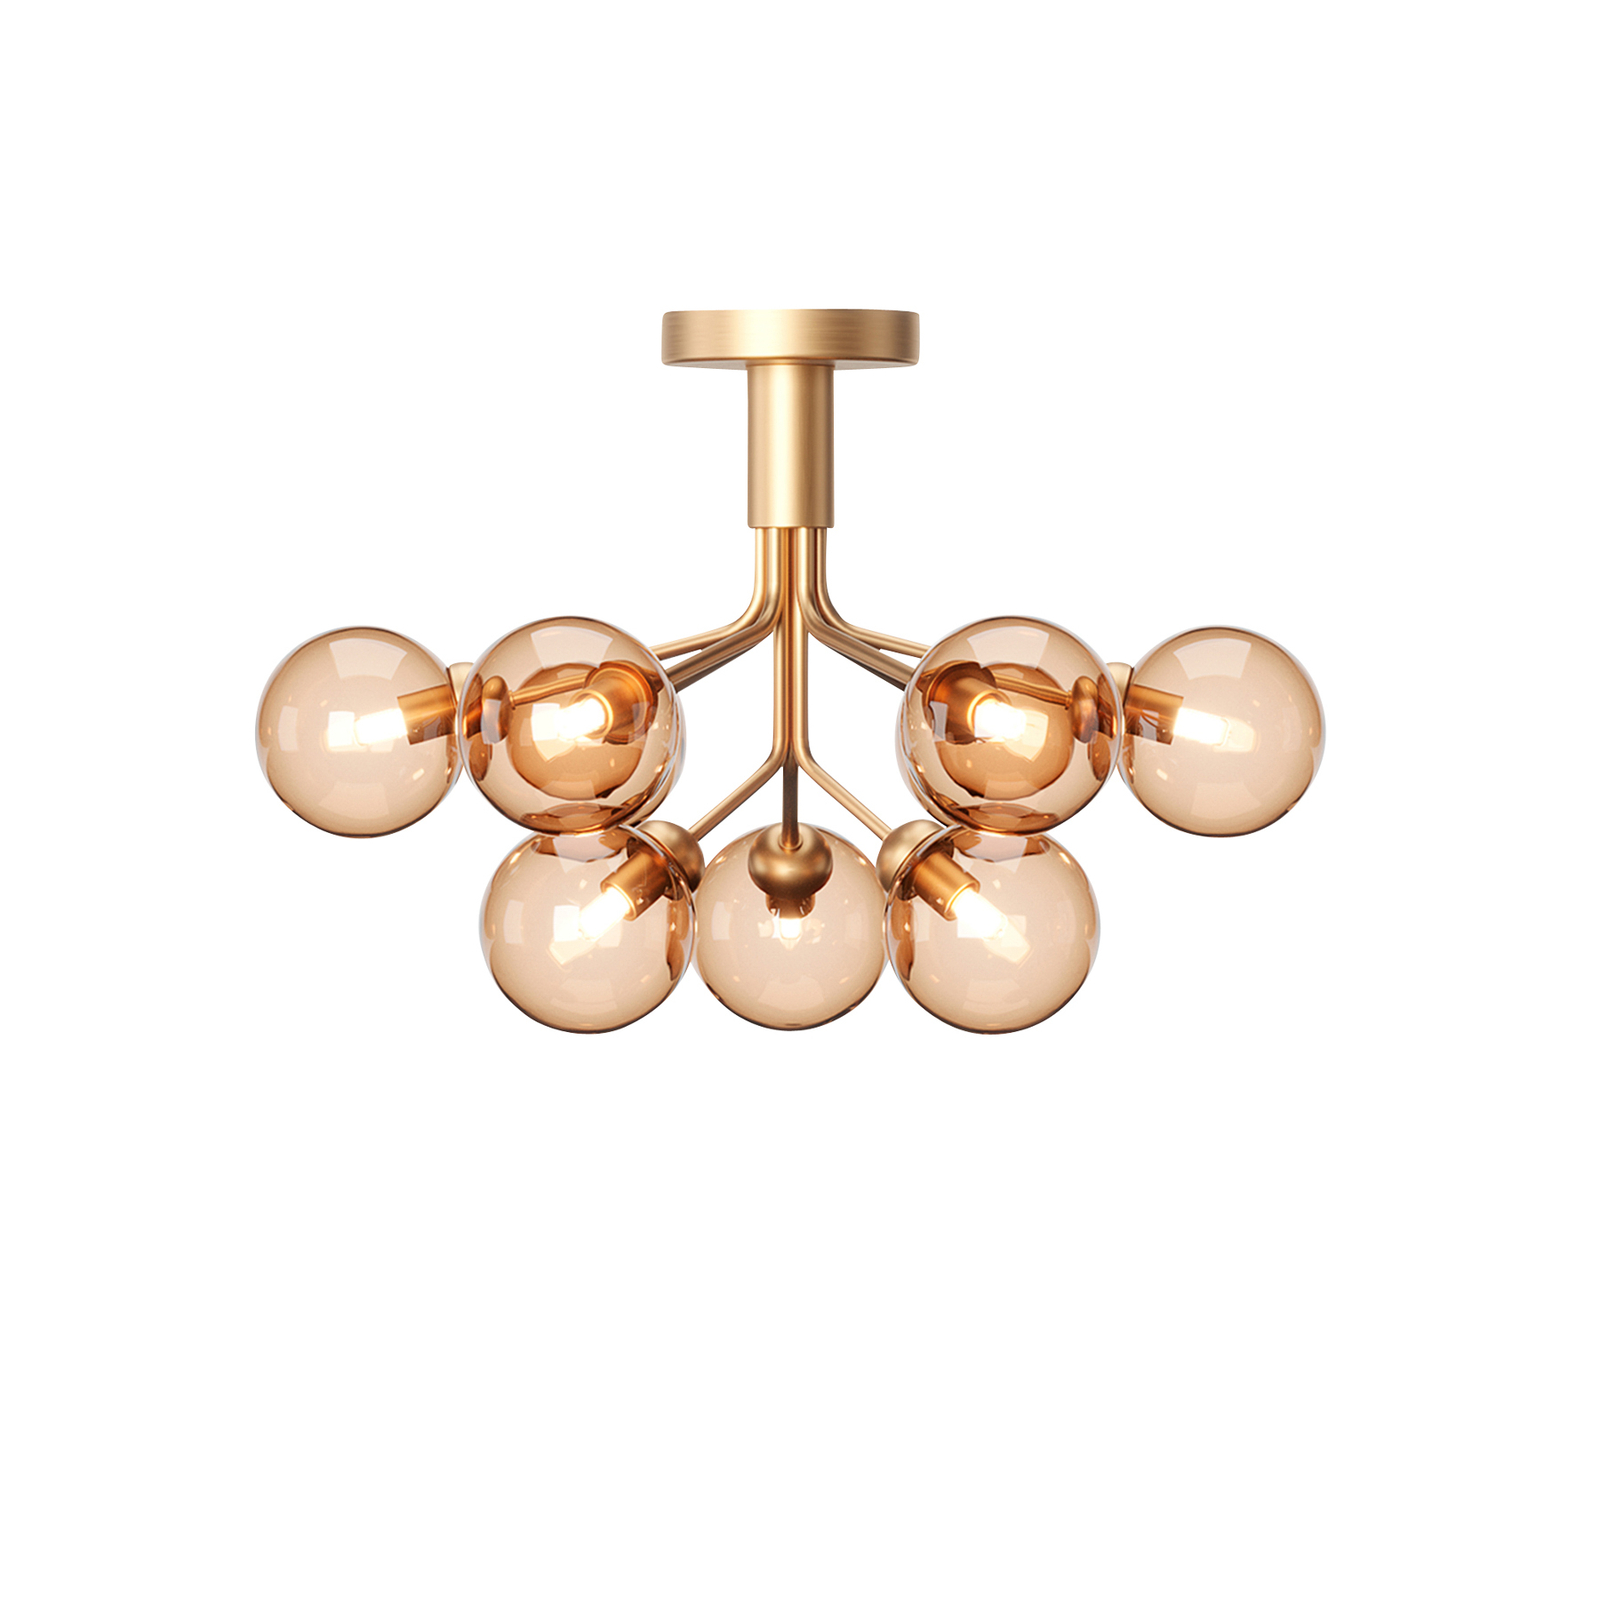 Nuura Apiales 9 Ceiling ceiling lamp, brass/gold